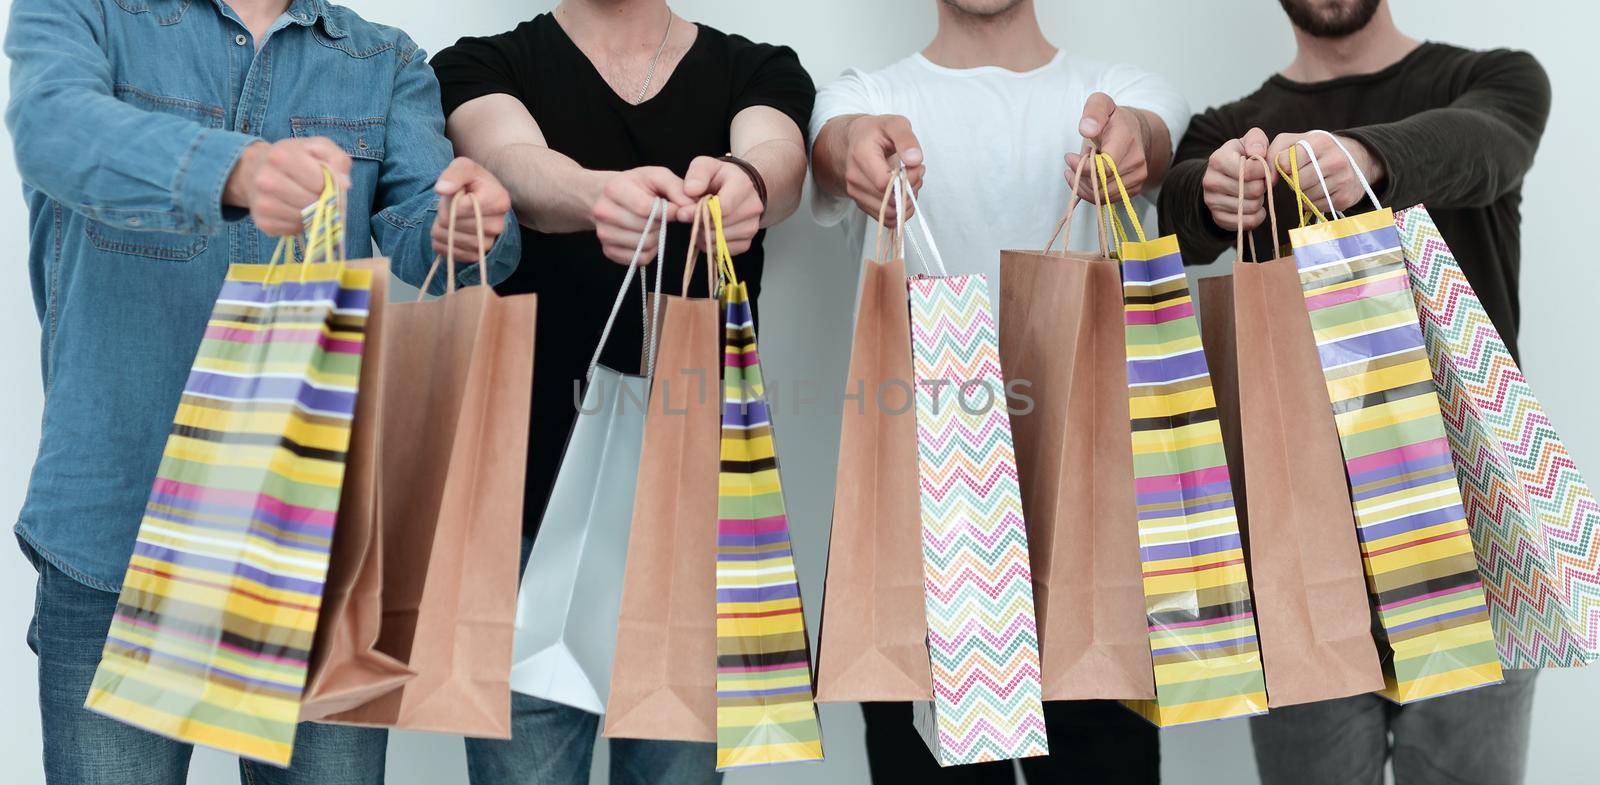 close up.group of students with shopping bags .shopping and lifestyle